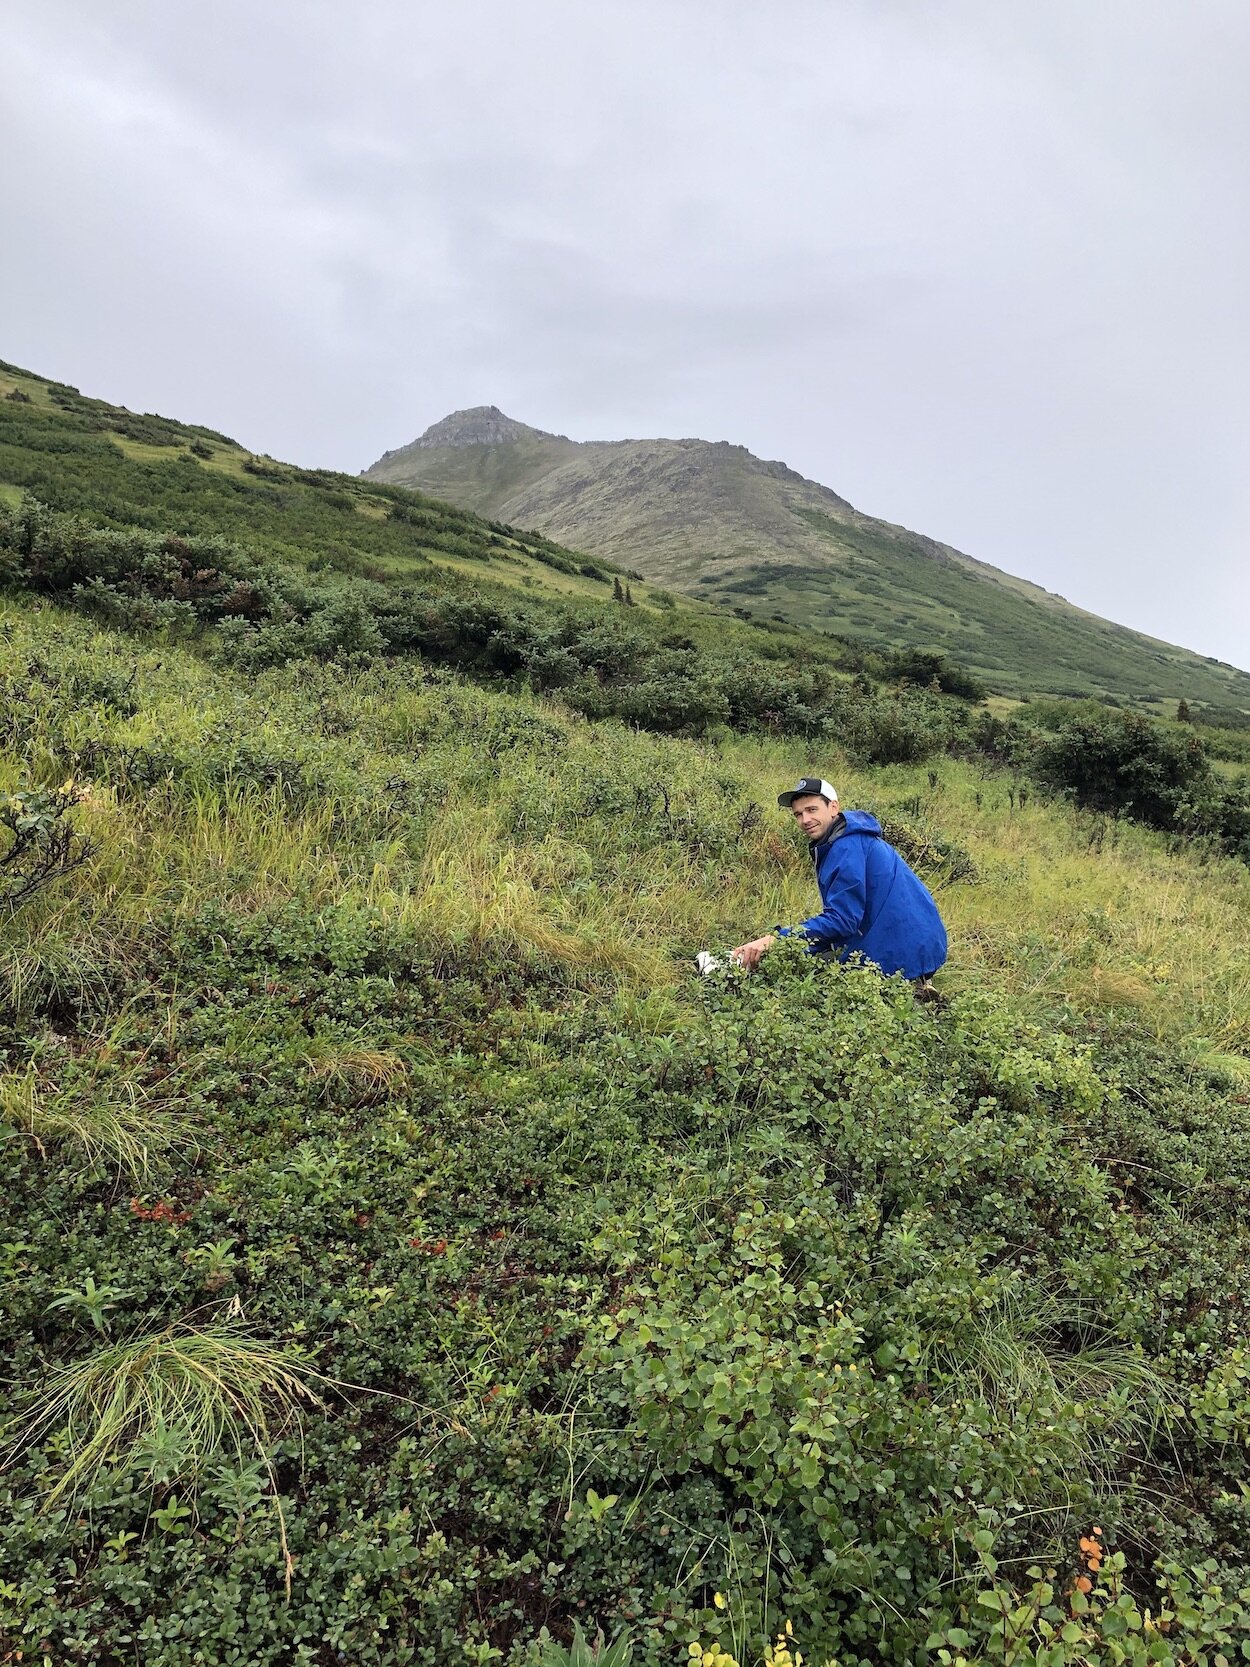 Berry picking in the Chugach Mountains